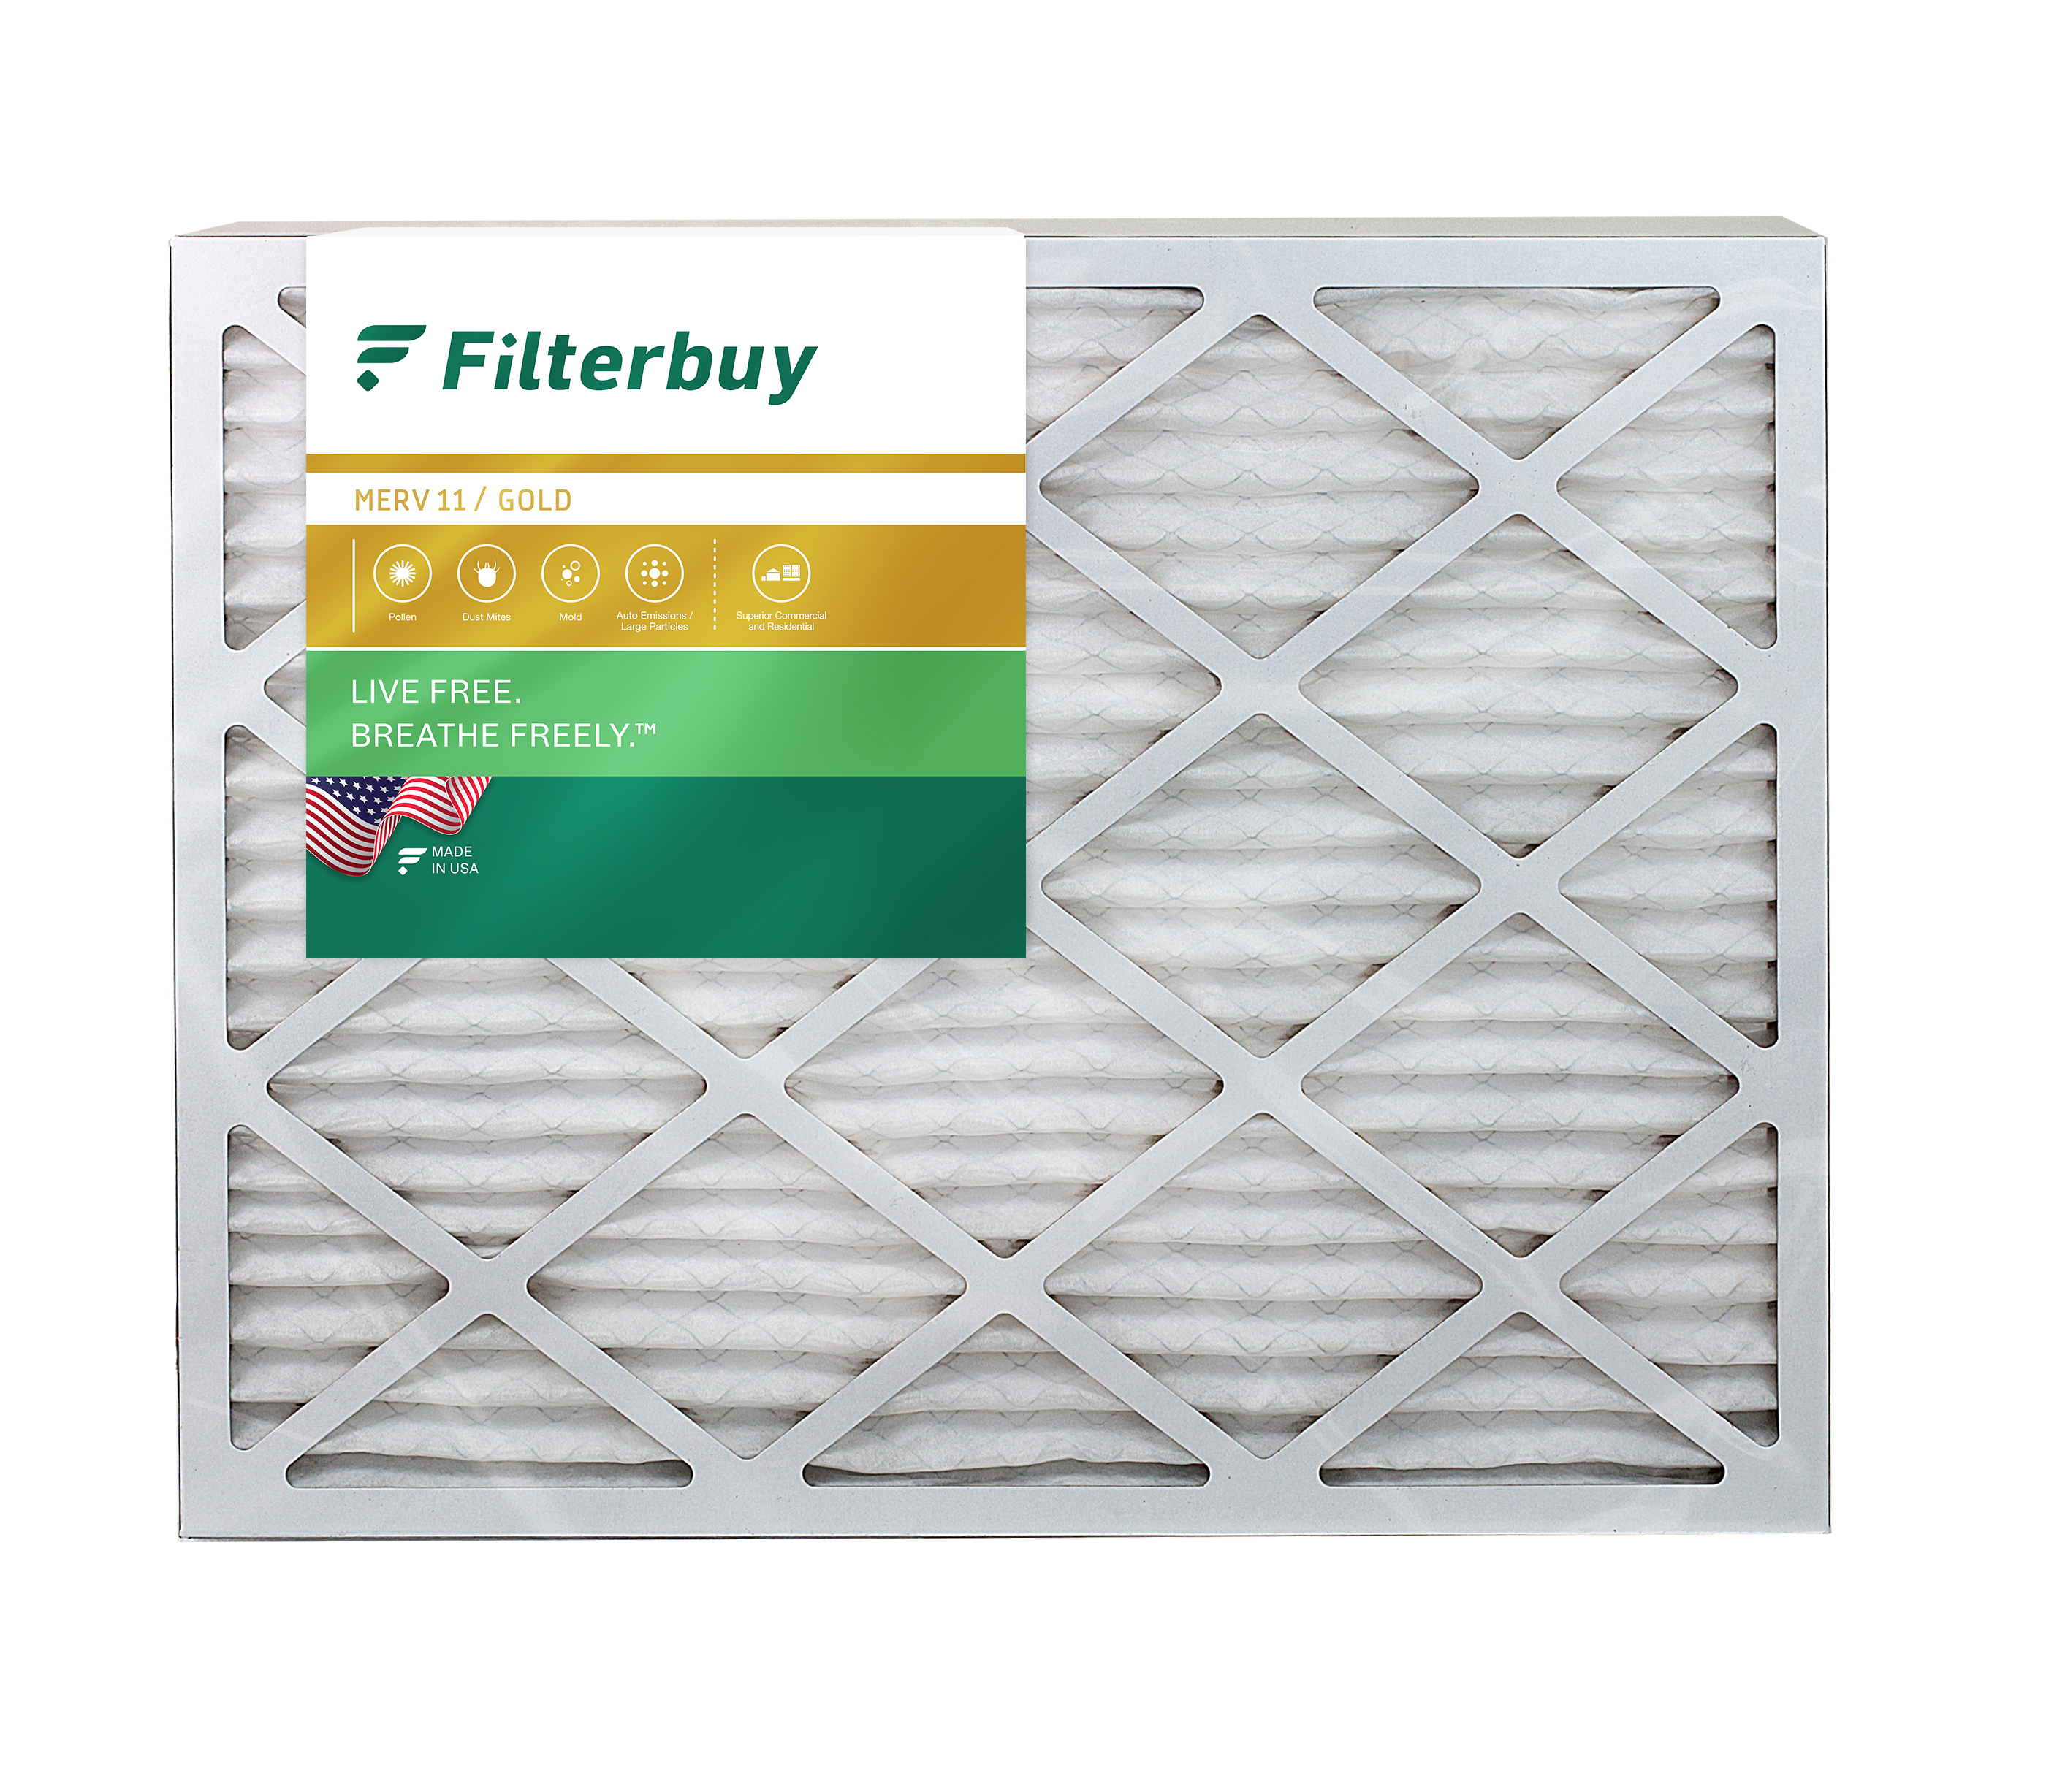 Filter King 8x30x1 Air Filters Actual Size 7.5x29.5x1 Increases Air Quality 6 Pack Allergen Reduction Protection Against Mold and Pollen MERV 8 HVAC Pleated AC Furnace Filters 